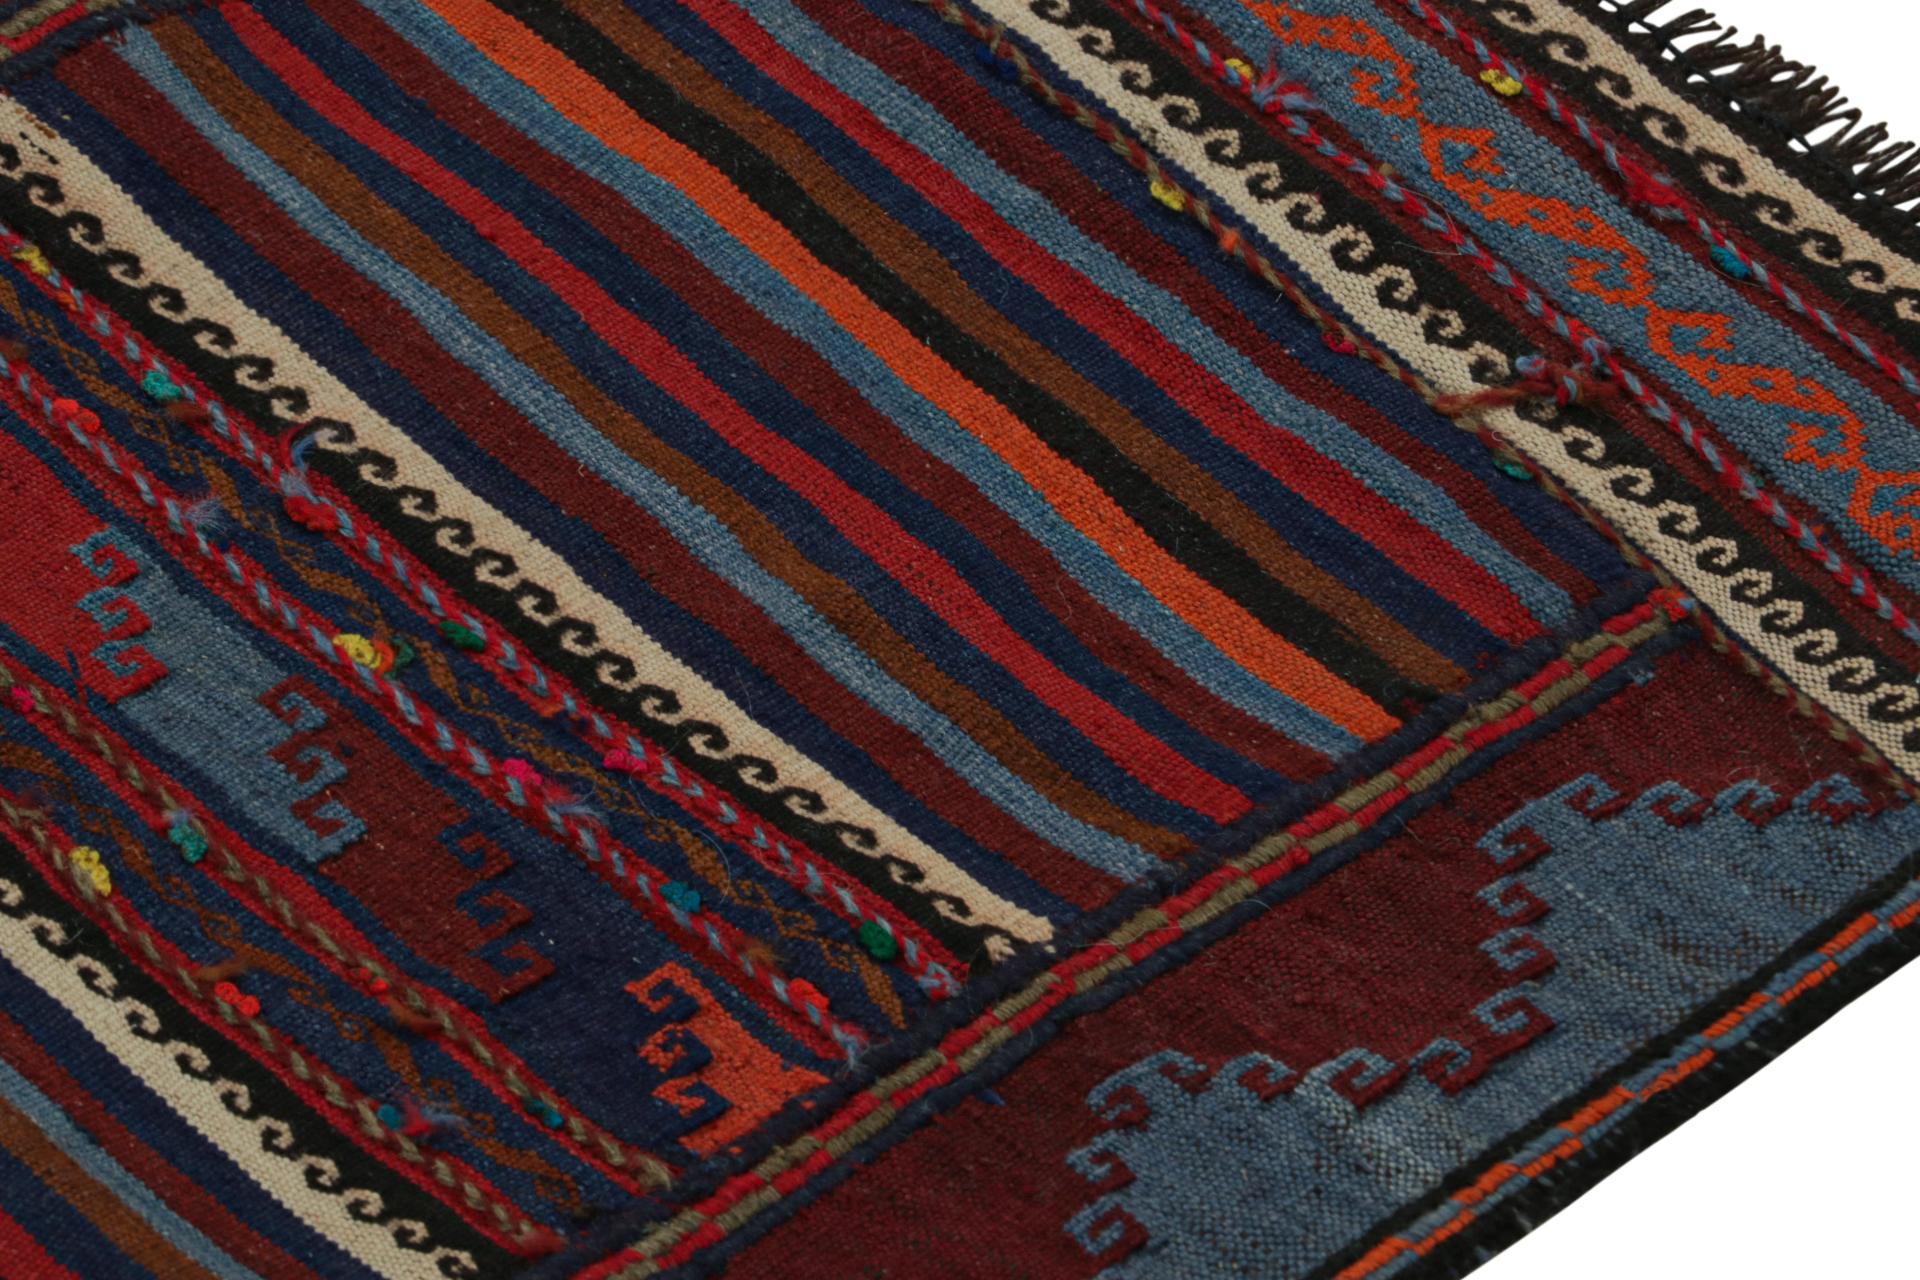 Vintage Afghan Baluch Kilim Runner Rug, with Geometric Patterns from Rug & Kilim In Good Condition For Sale In Long Island City, NY